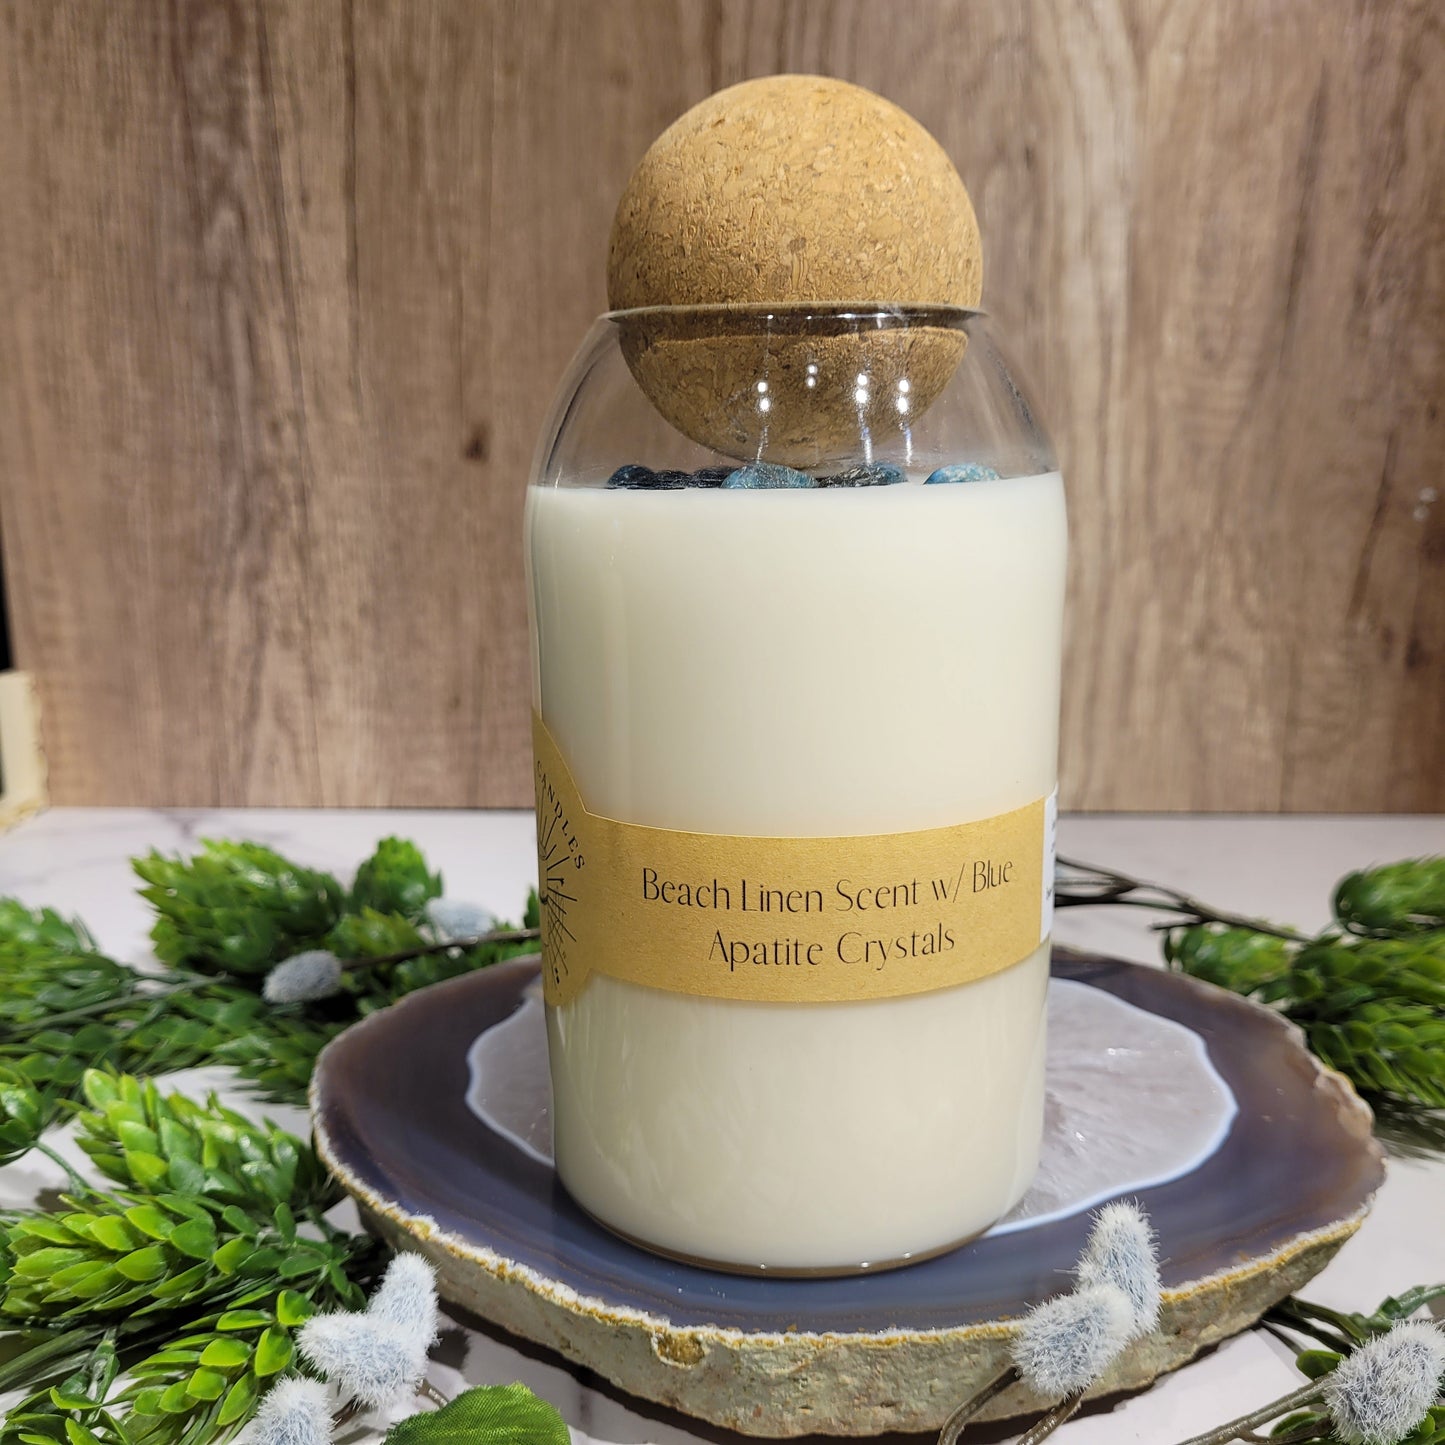 Beach Linen Soy Candle